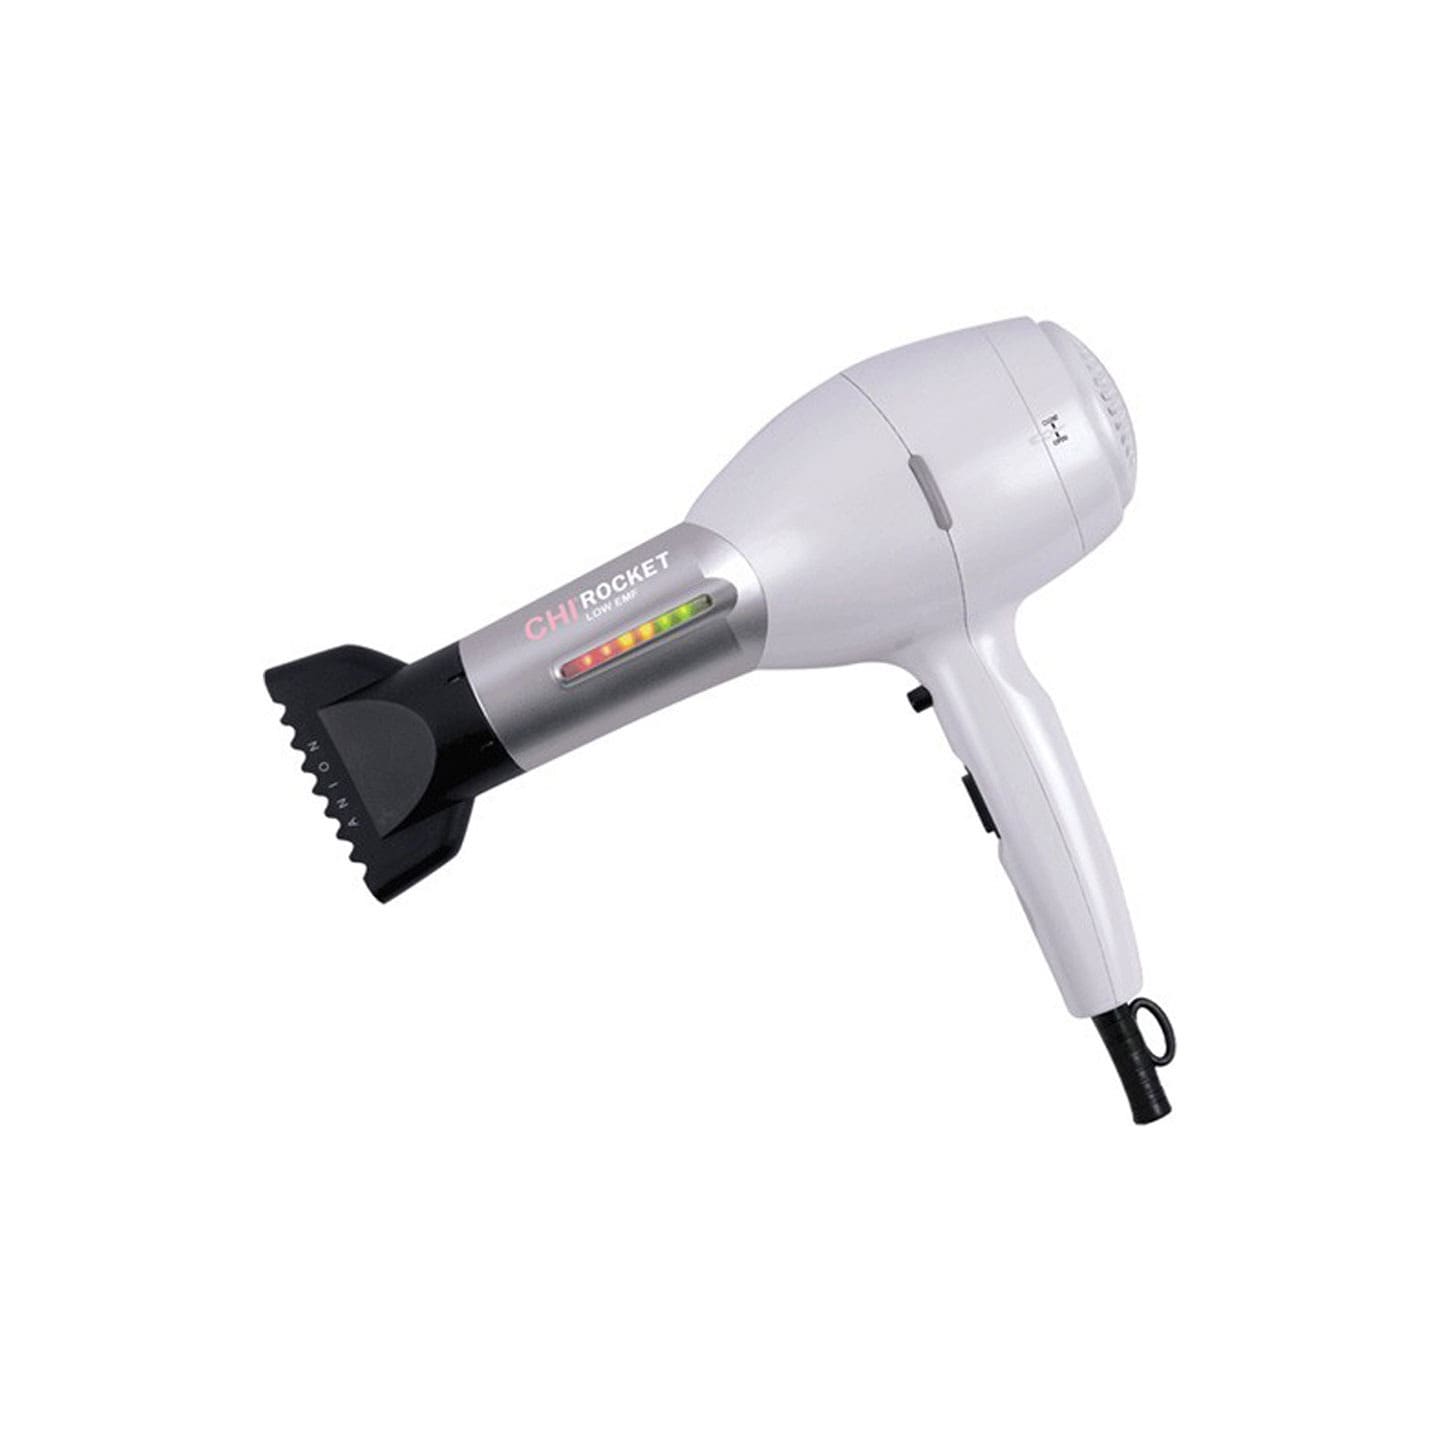 CHI Rocket Hello Beautiful 1800W Hair Dryer Free Shipping Today